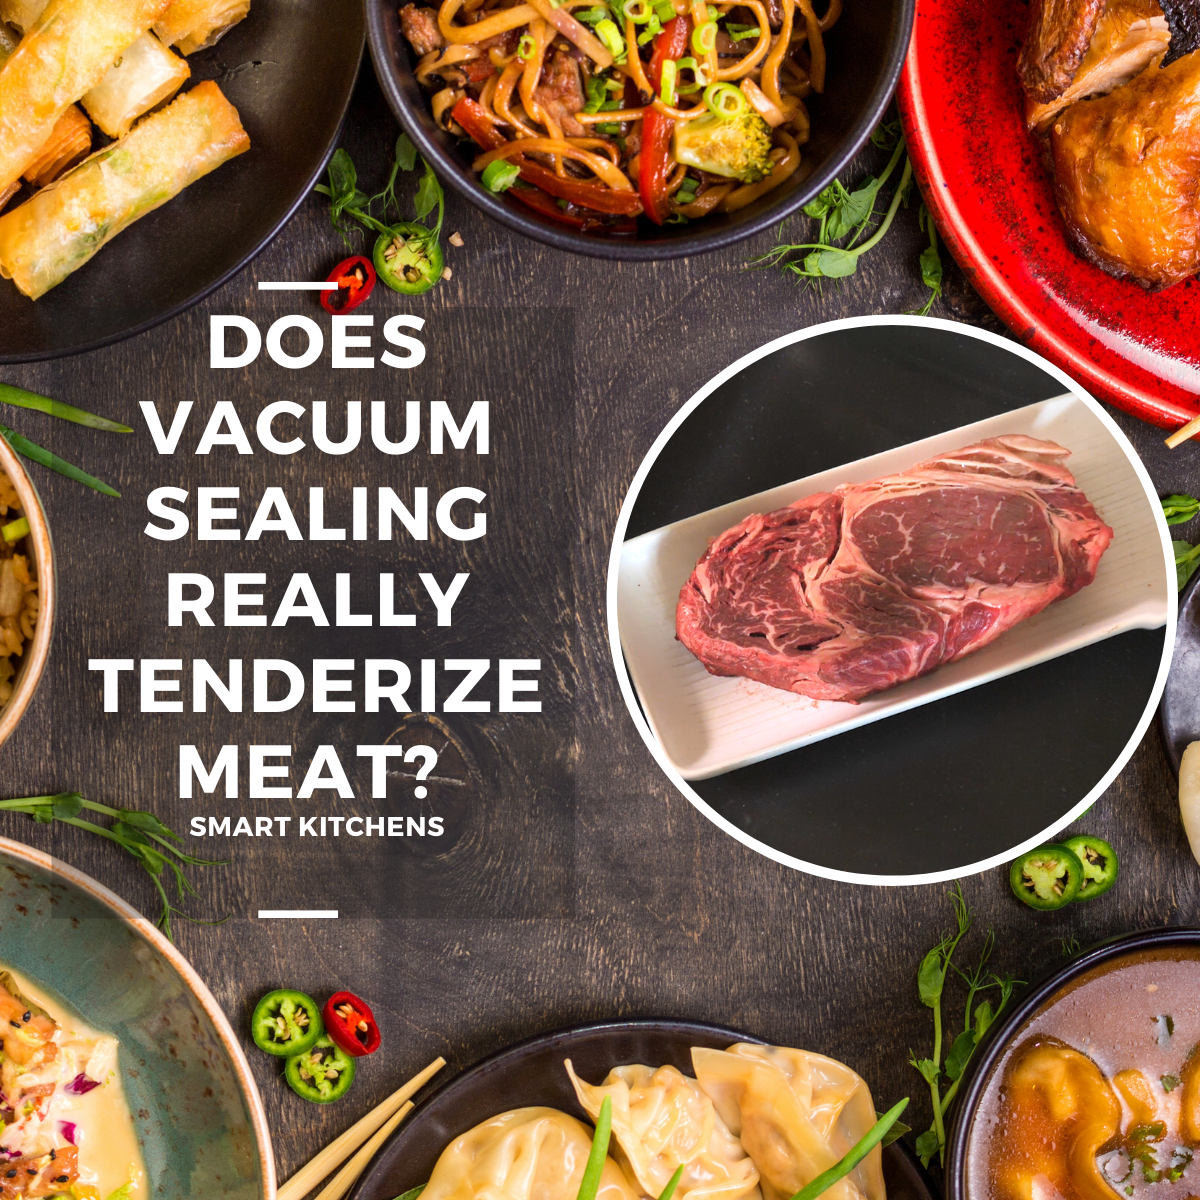 Does vacuum sealing really tenderize meat?